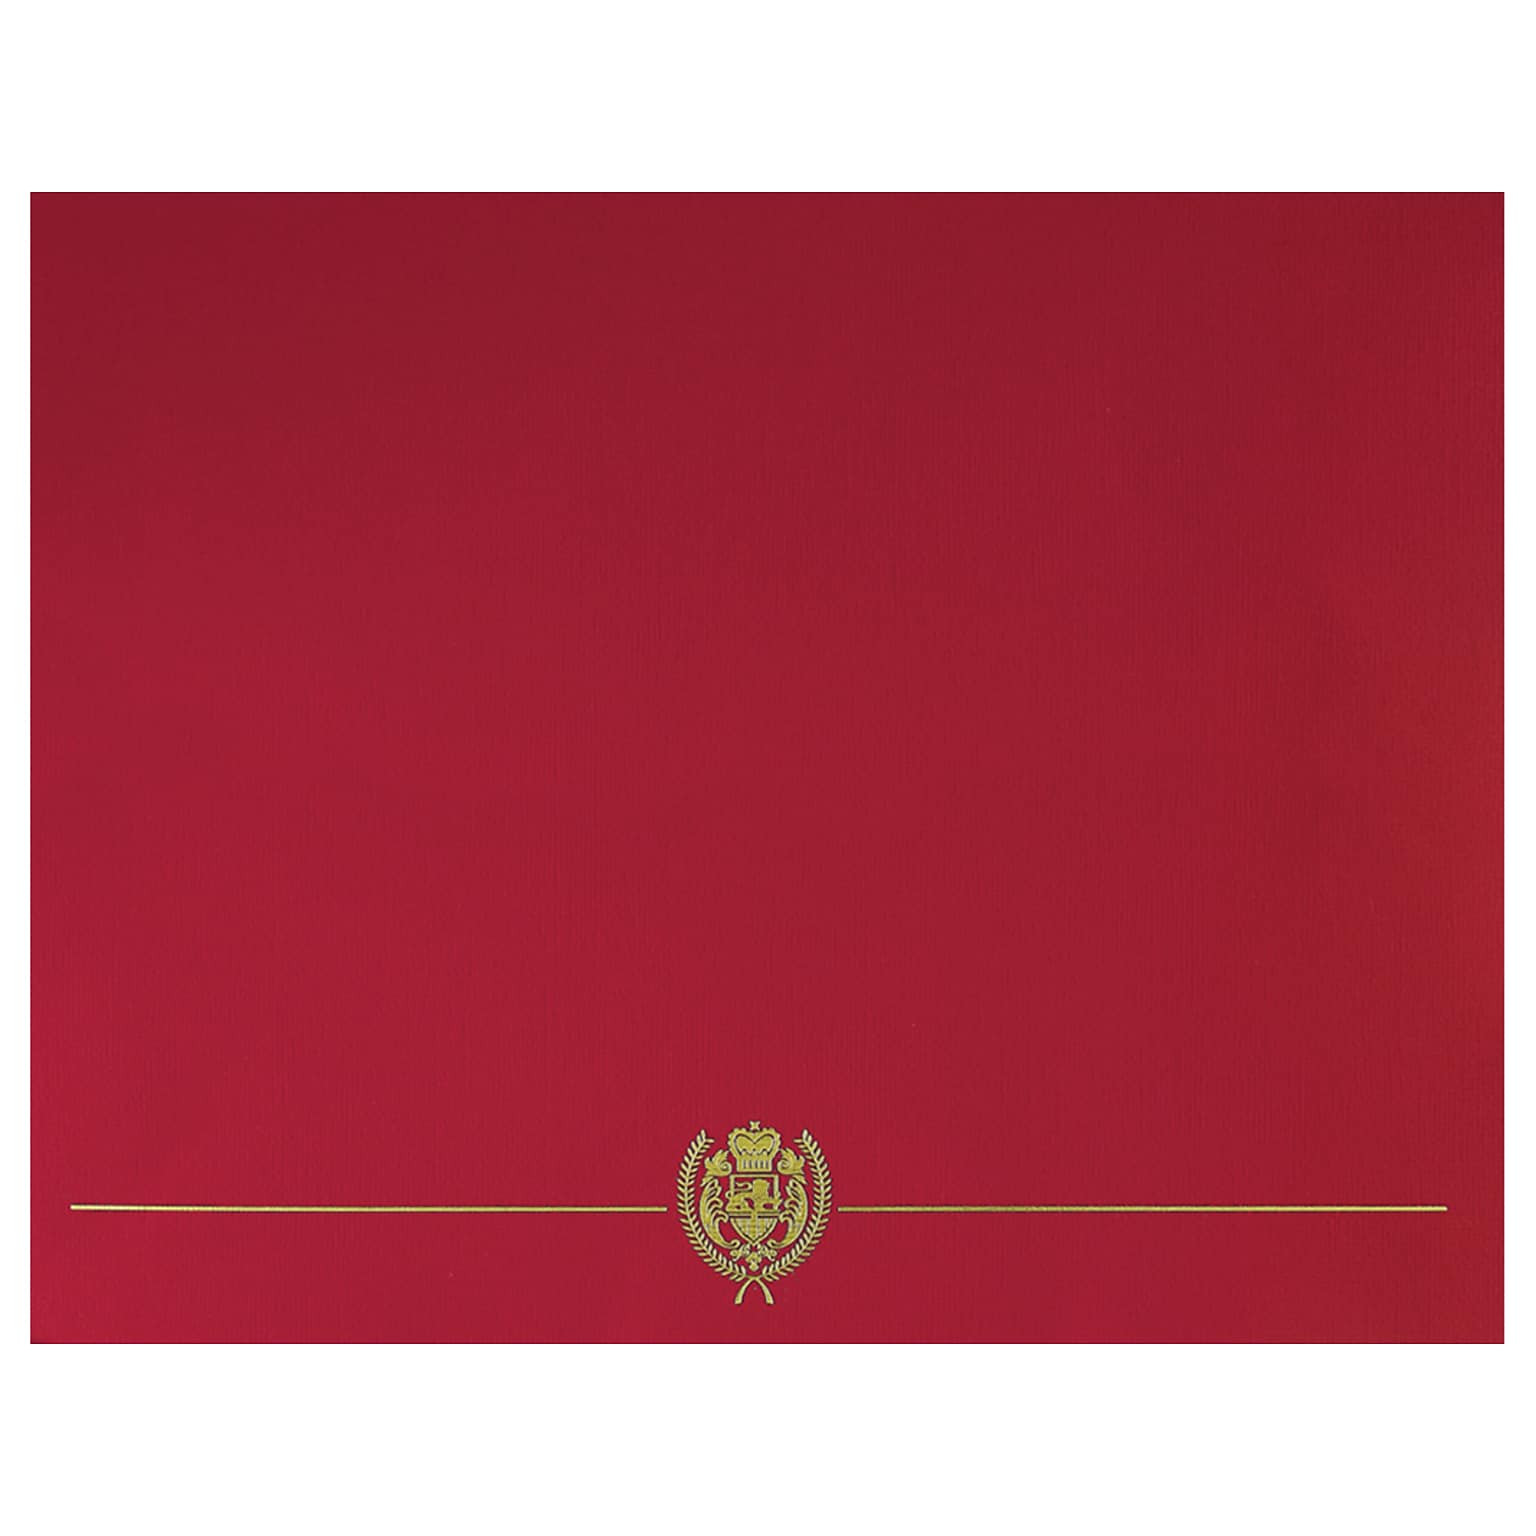 Great Papers Classic Crest Certificate Holders, 12 x 9.38, Red, 50/Pack (903031PK10)